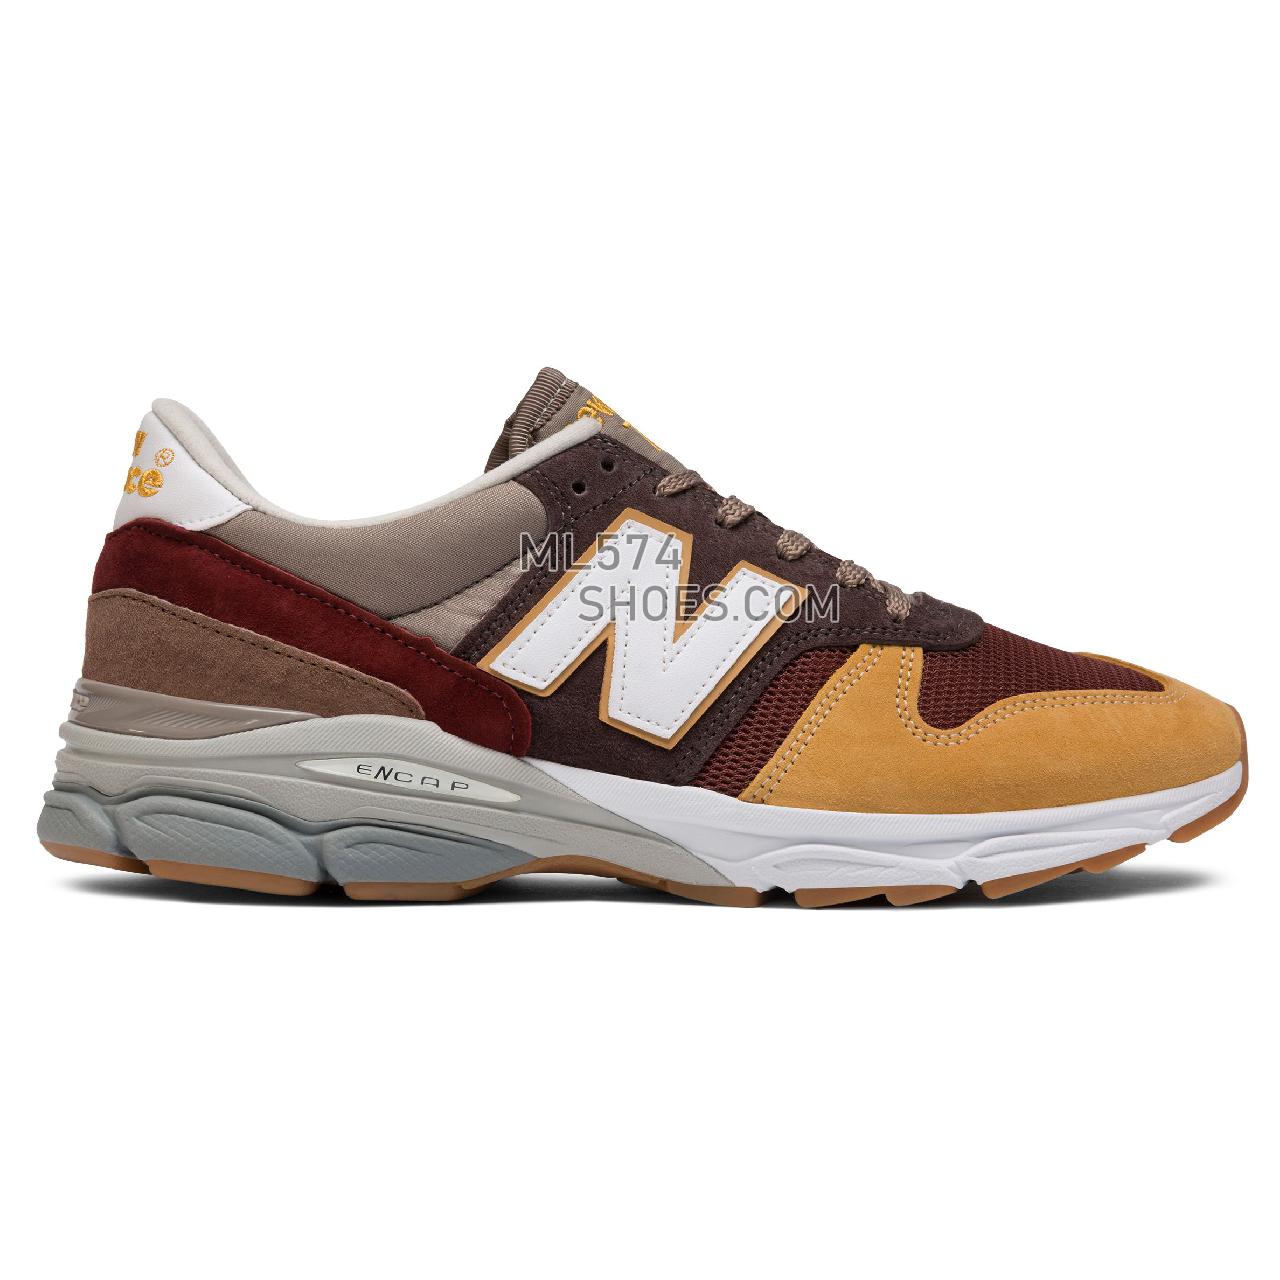 New Balance 770.9 Made in UK - Men's 770.9 Made in UK Classic M7709-E - Honey with Brown Sugar - M7709FT